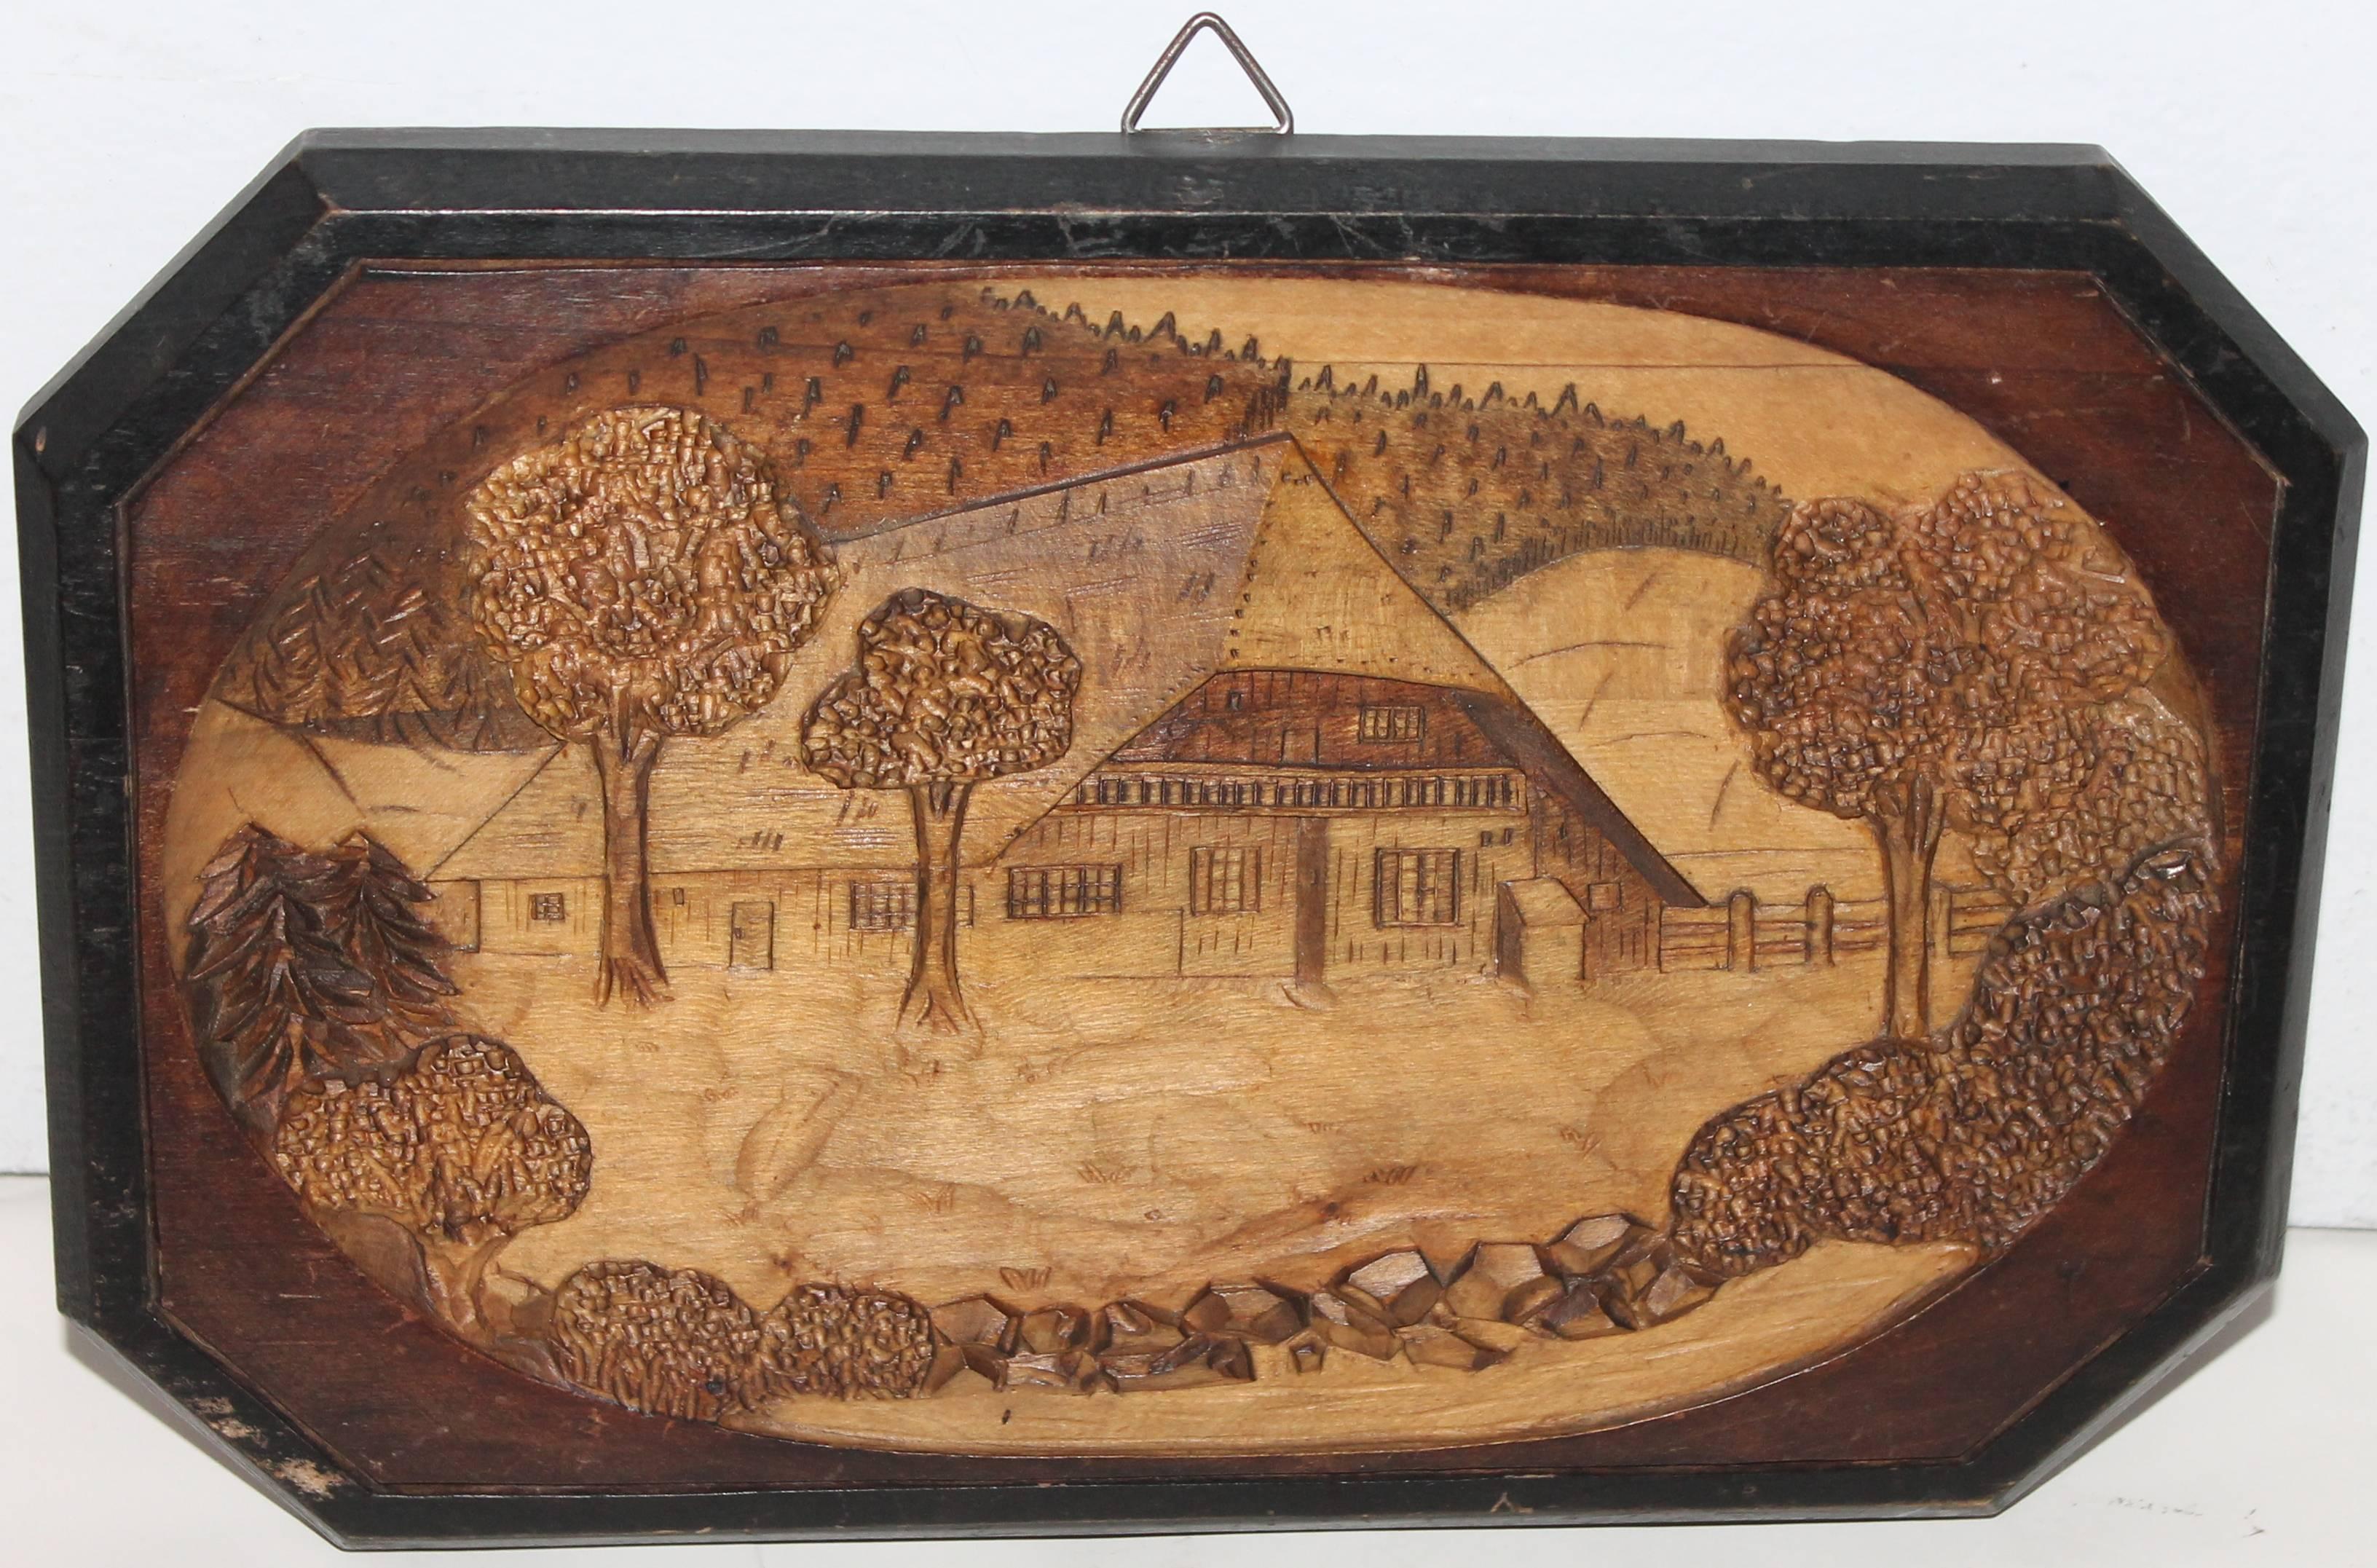 This hand-carved image of a cabin in the mountains is in amazing condition. This is all hand-carved and in great as found condition. This folk art plaque is unsigned.